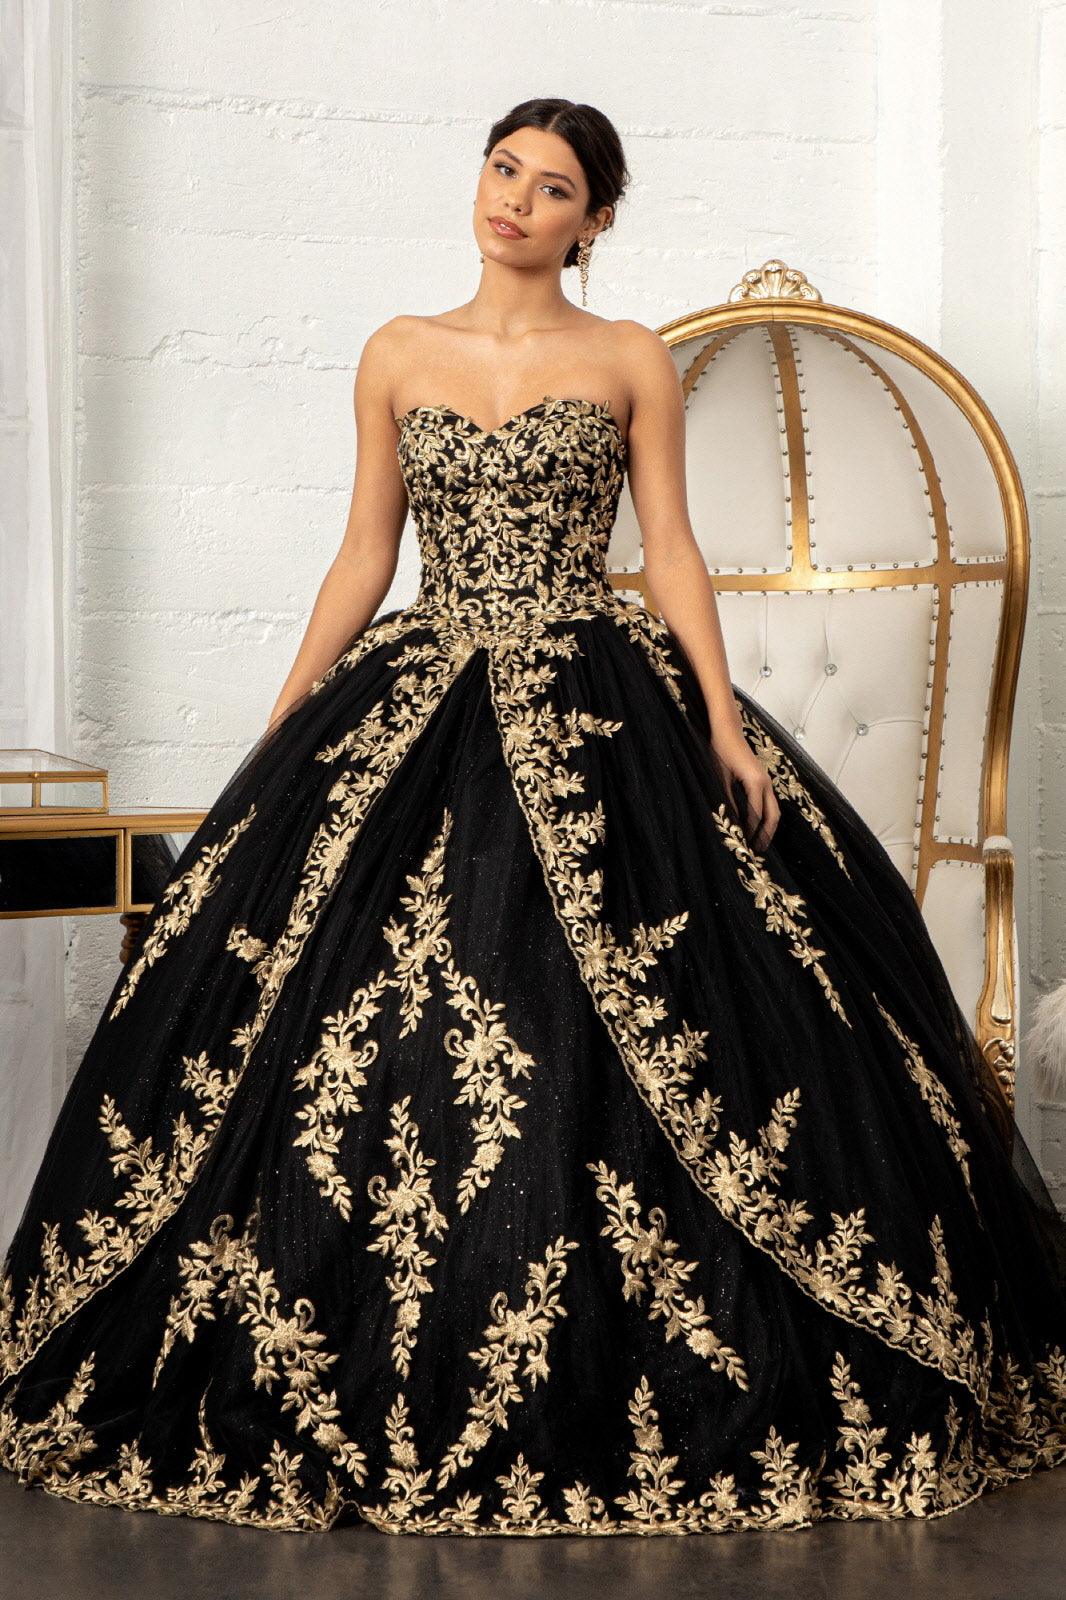 Belle of the Ball: A 5-Minute Guide to Ball Gowns – 5-Minute History